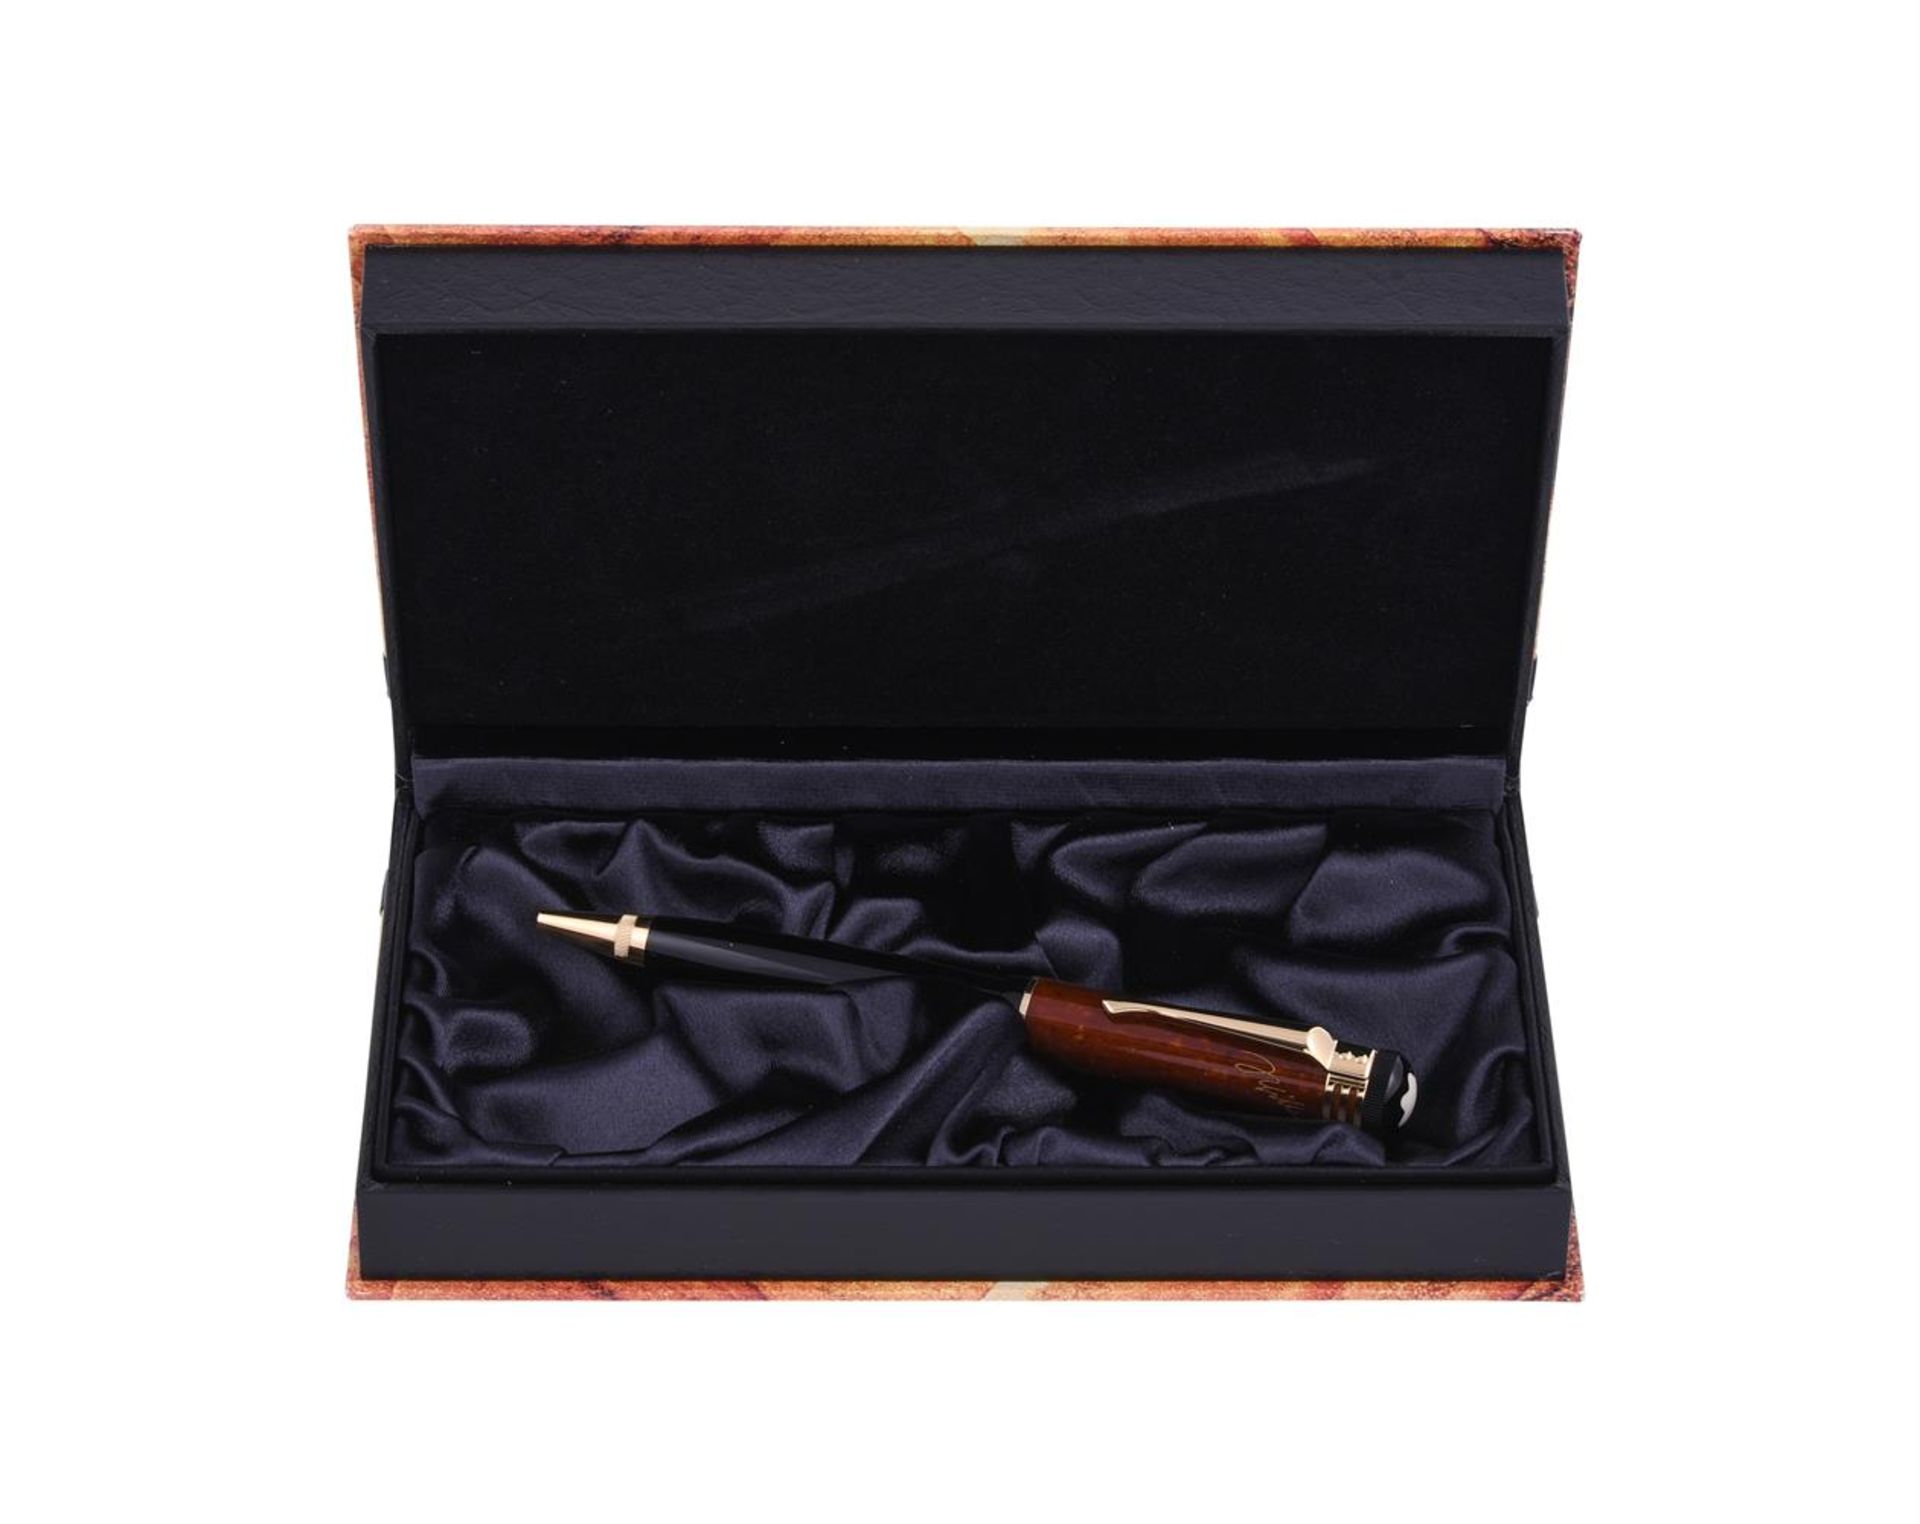 MONTBLANC, WRITERS EDITION, FRIEDRICH SCHILLER A LIMITED EDITION BALLPOINT PEN - Image 2 of 2